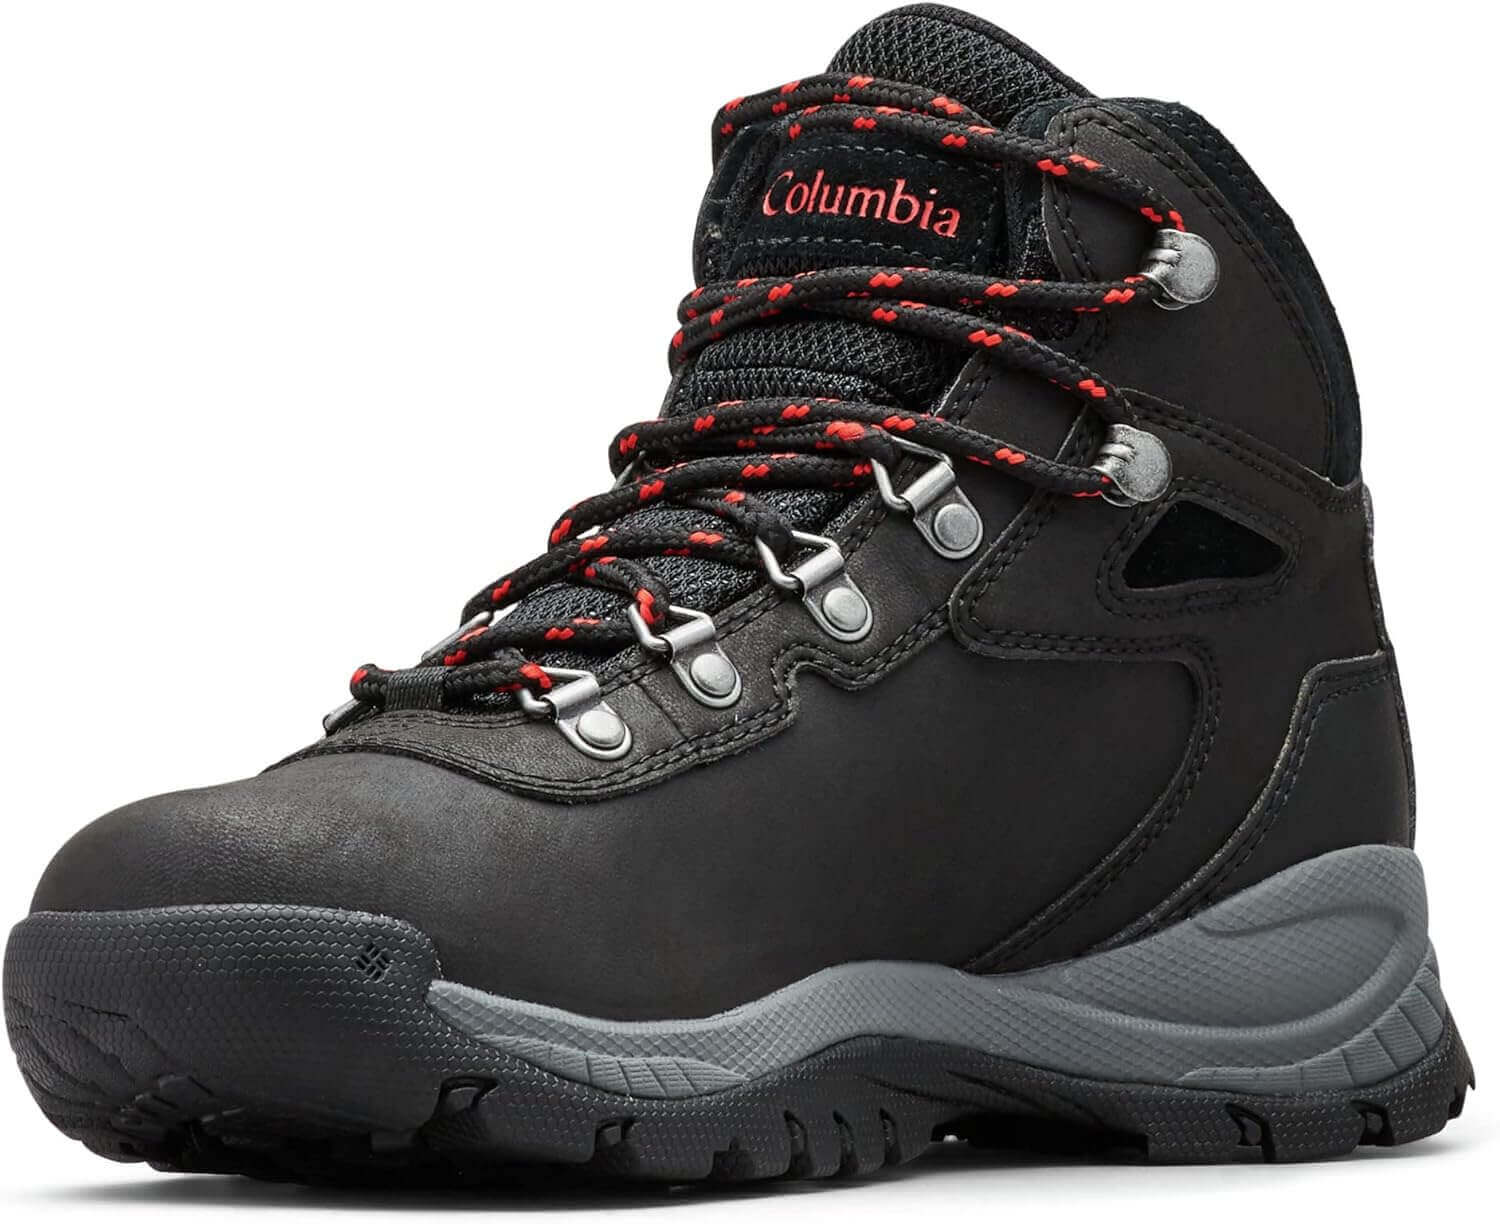 Shop The Latest >Columbia Women's Newton Ridge Waterproof Hiking Boot > *Only $87.75*> From The Top Brand > *Columbial* > Shop Now and Get Free Shipping On Orders Over $45.00 >*Shop Earth Foot*